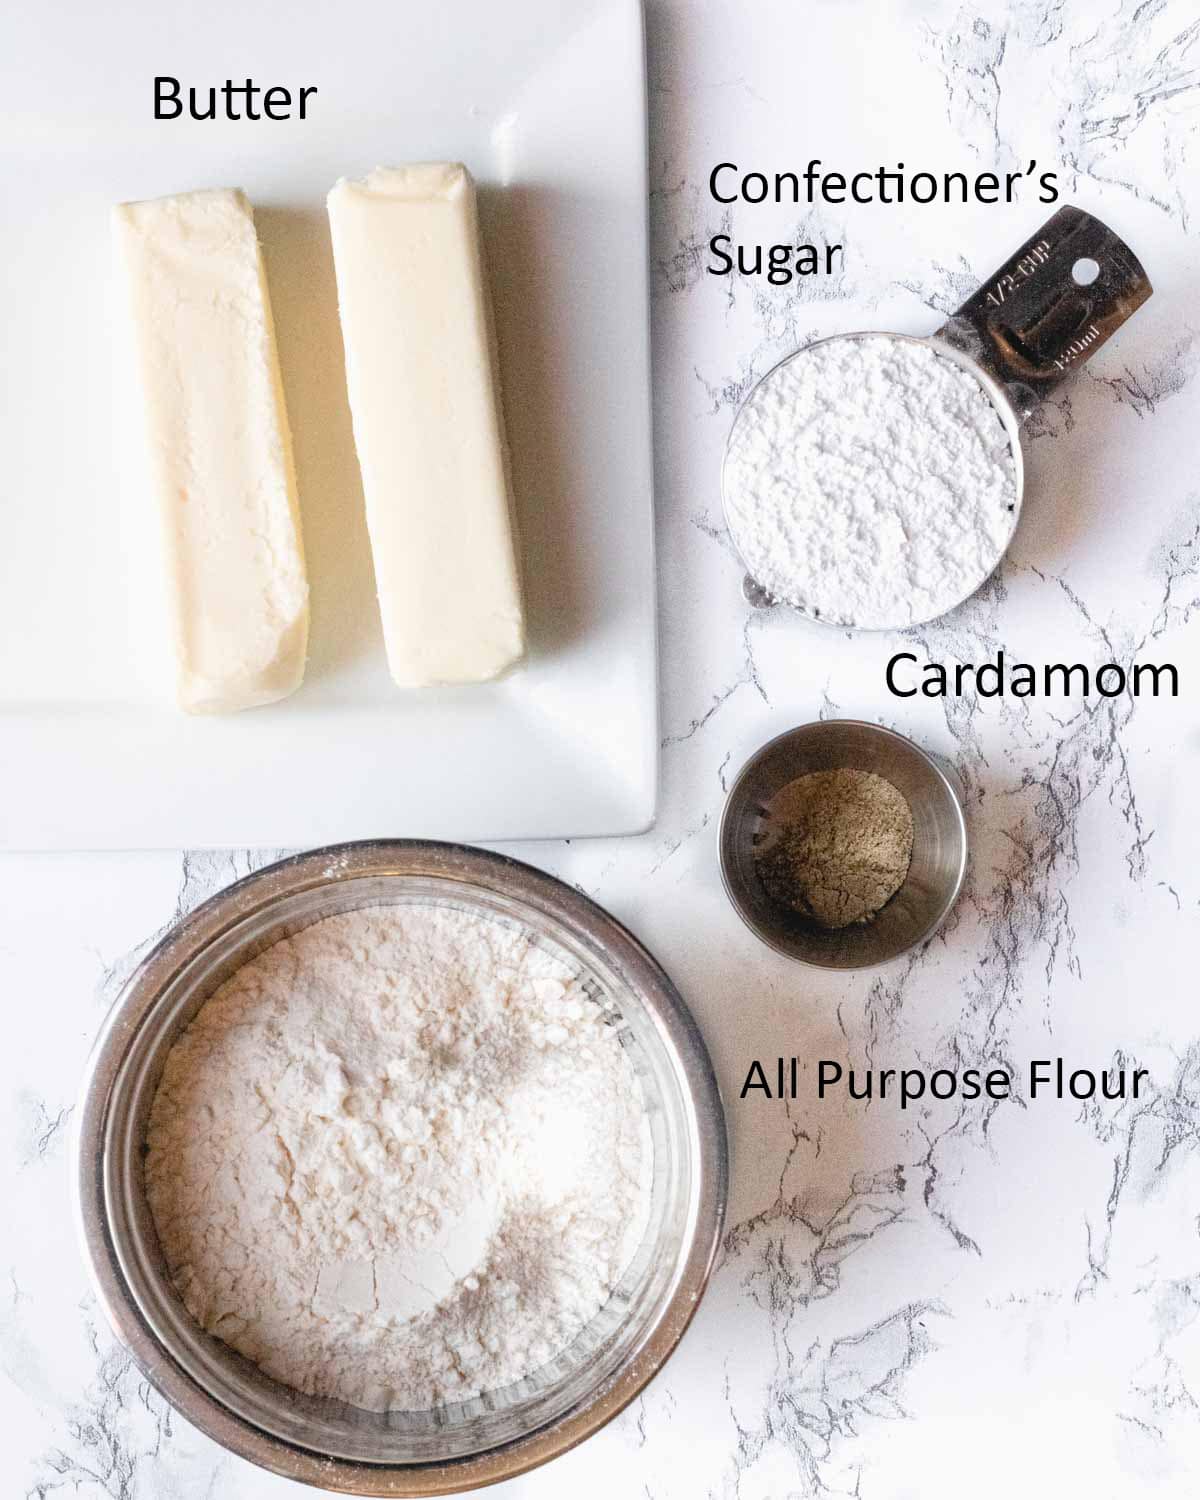 Cardamom shortbread cookie ingredients: butter, confectioner's sugar, flour, and cardamom.